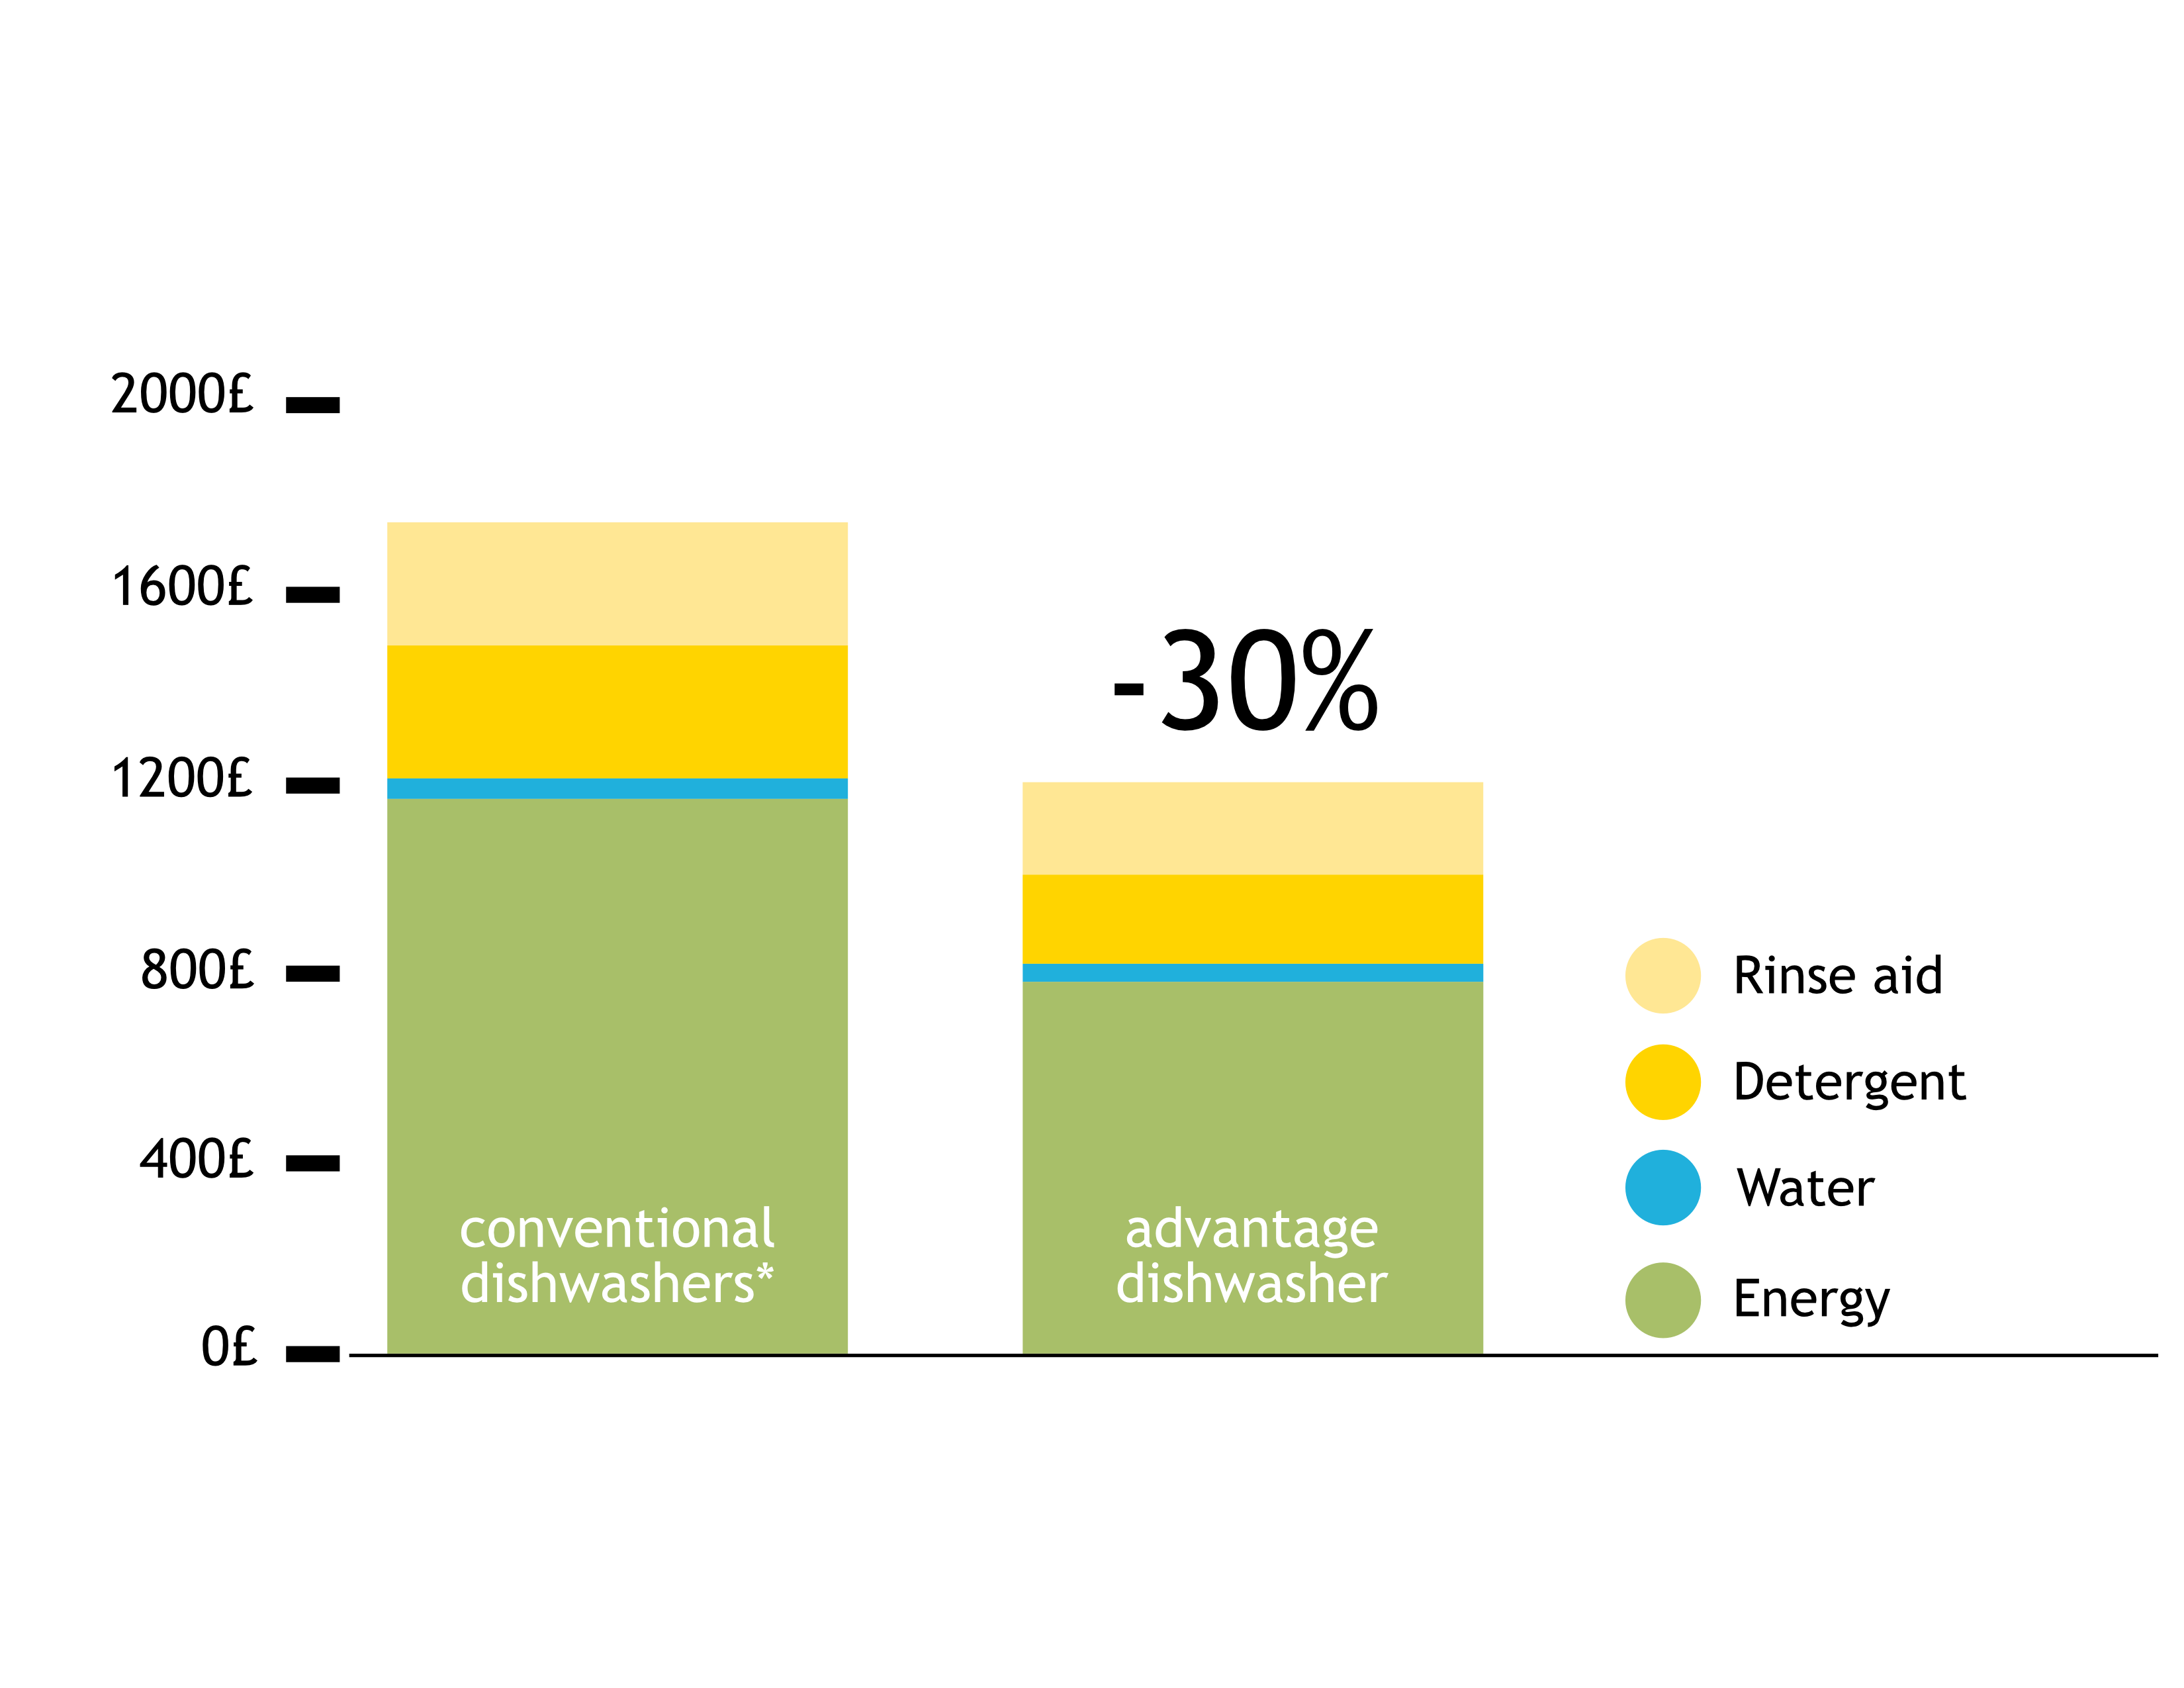 Graph showing the an Advantage commercial glasswasher uses 30% less energy (based on rinse aid, detergent, water and energy usage) than a conventional commercial glasswasher